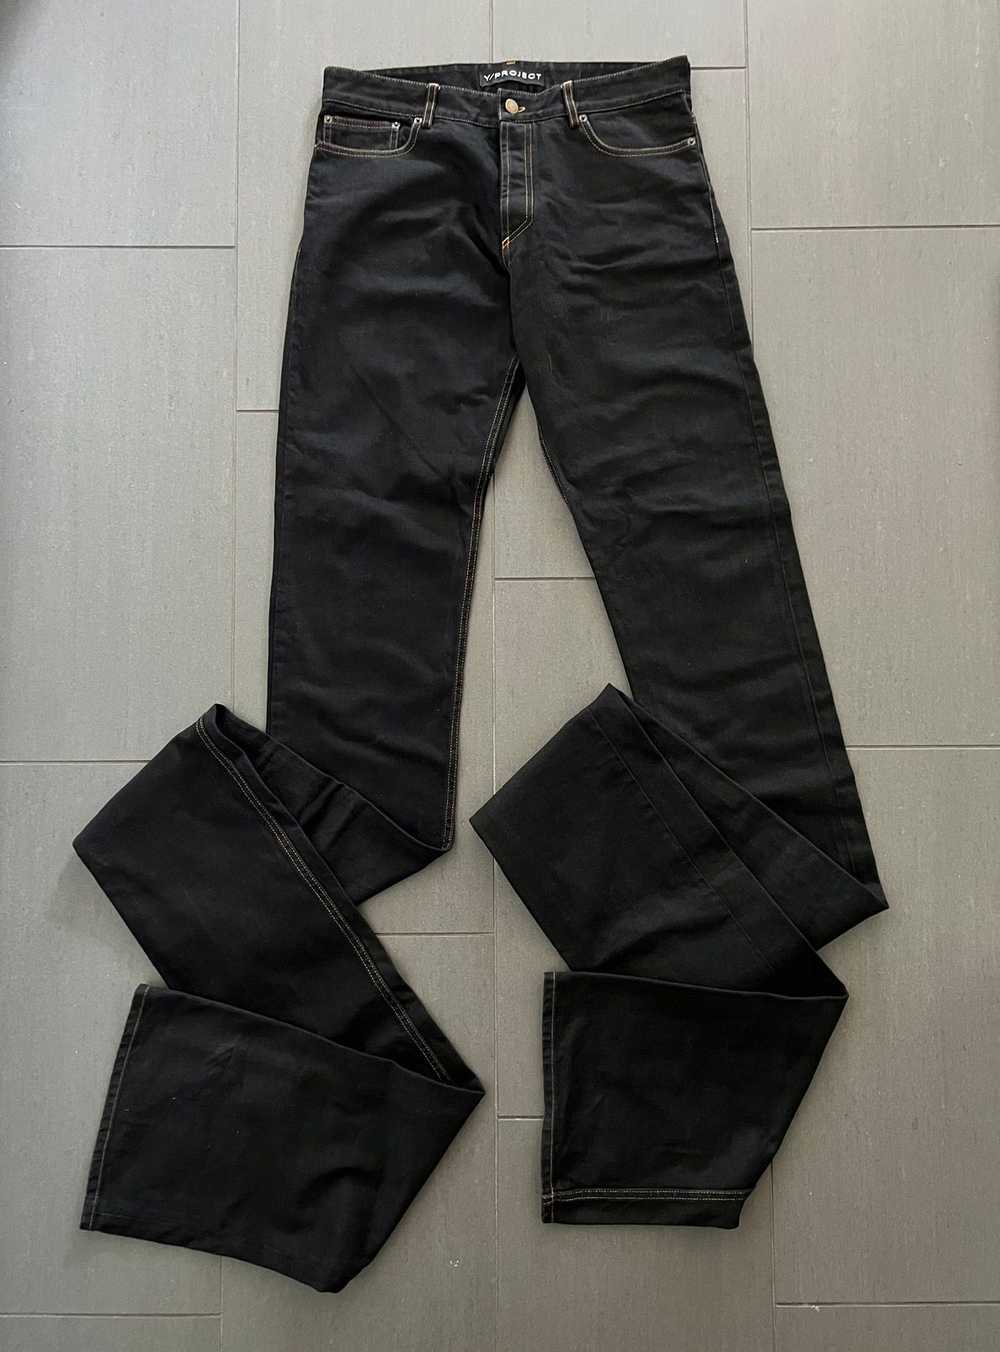 Y/Project YPROJECT Extra Long Stacking Denim Jeans - image 4